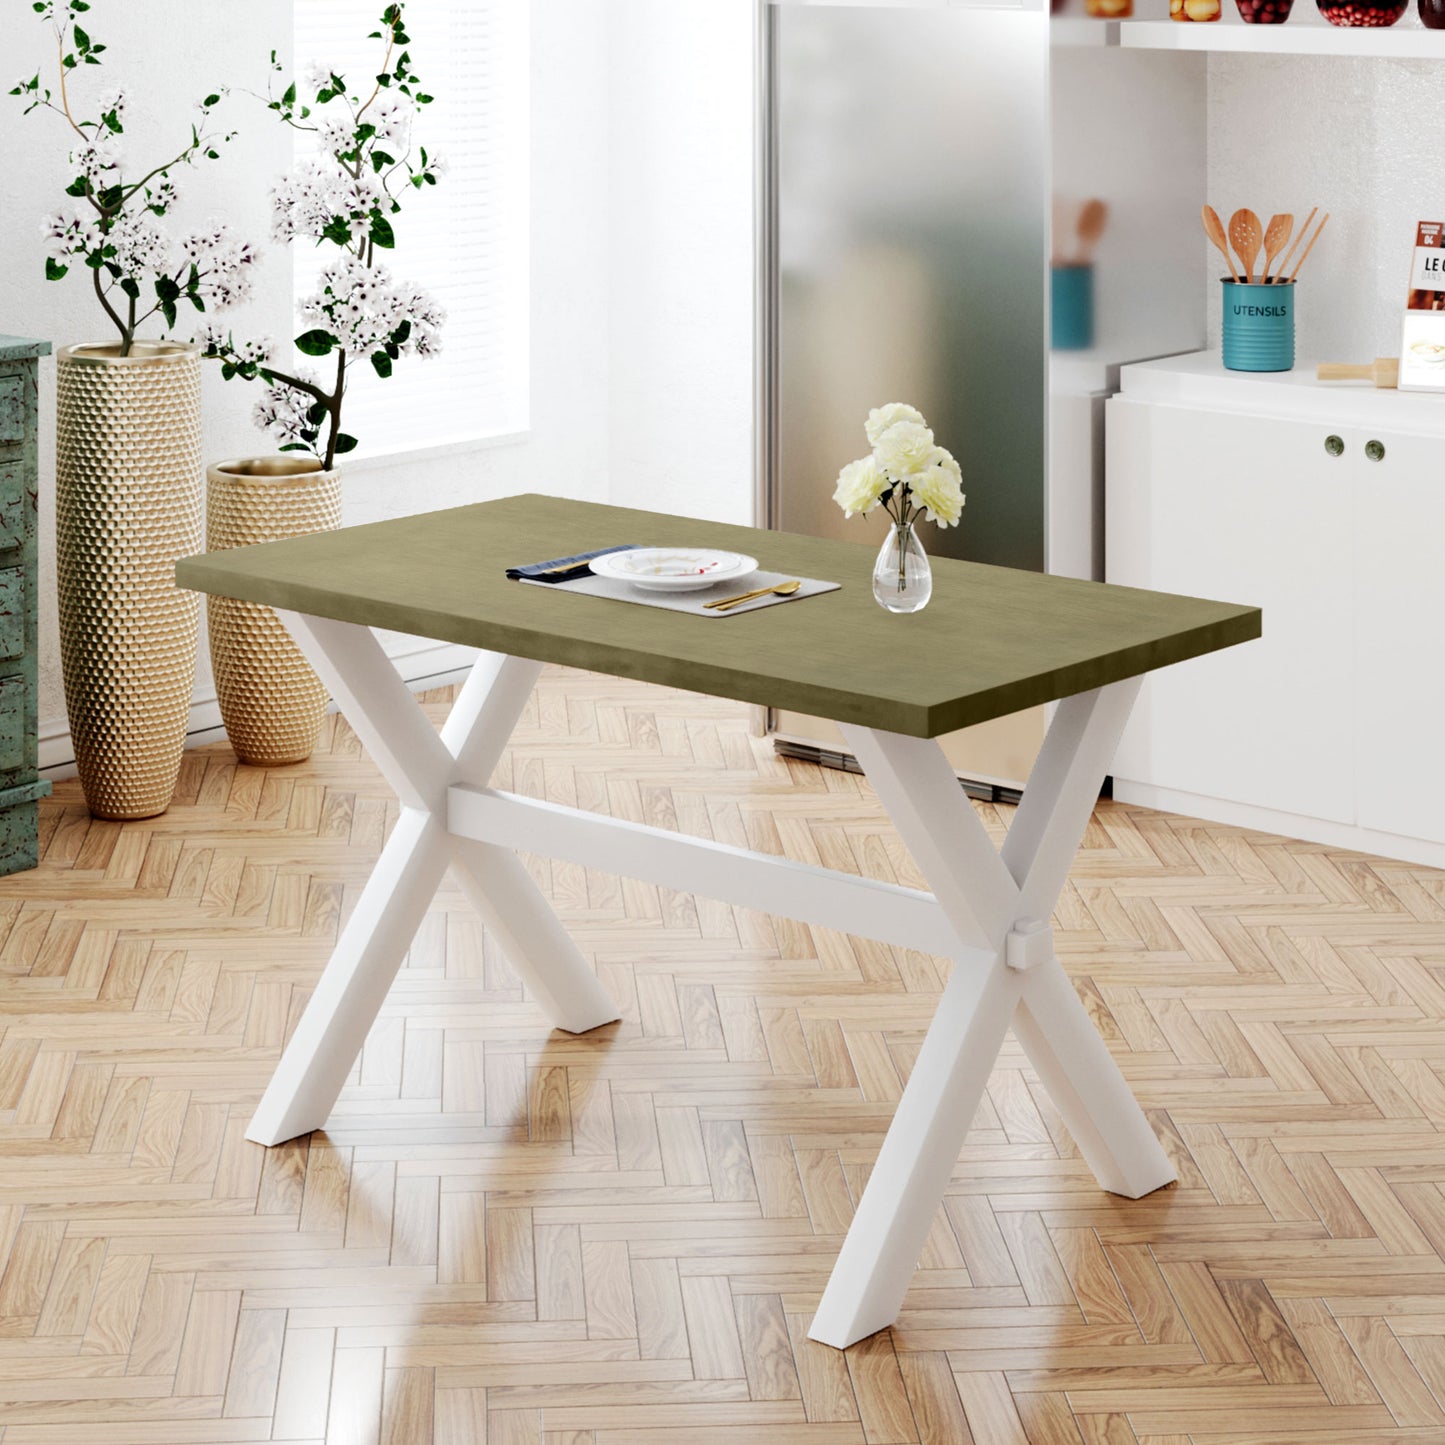 TOPMAX Farmhouse Rustic Wood Kitchen Dining Table with X-shape Legs, Gray Green